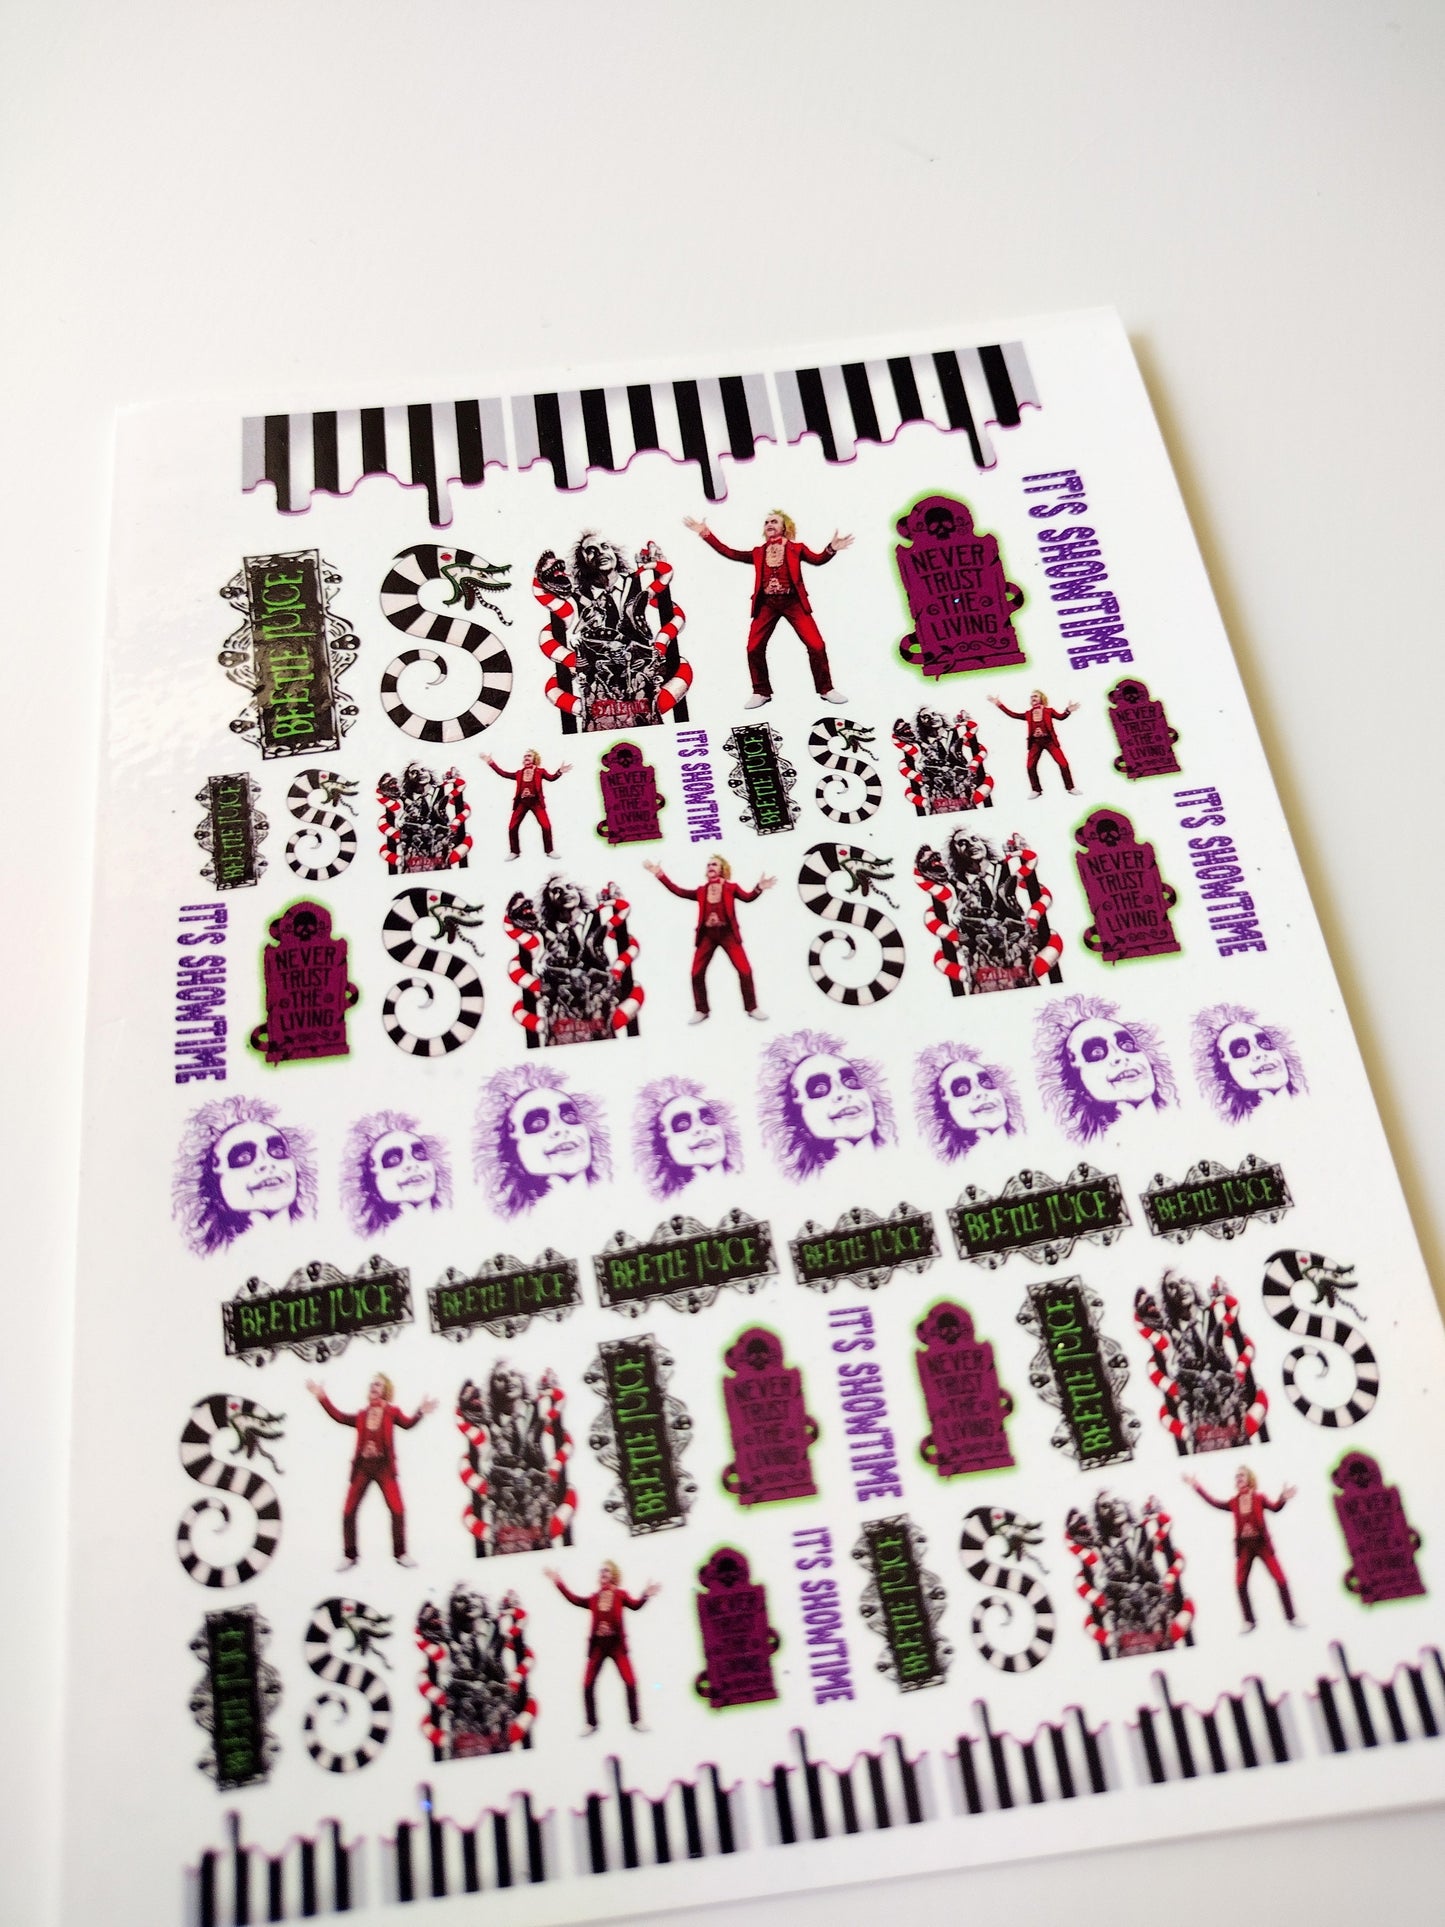 Beetle Juice Nail Art Decals It's Show Time!